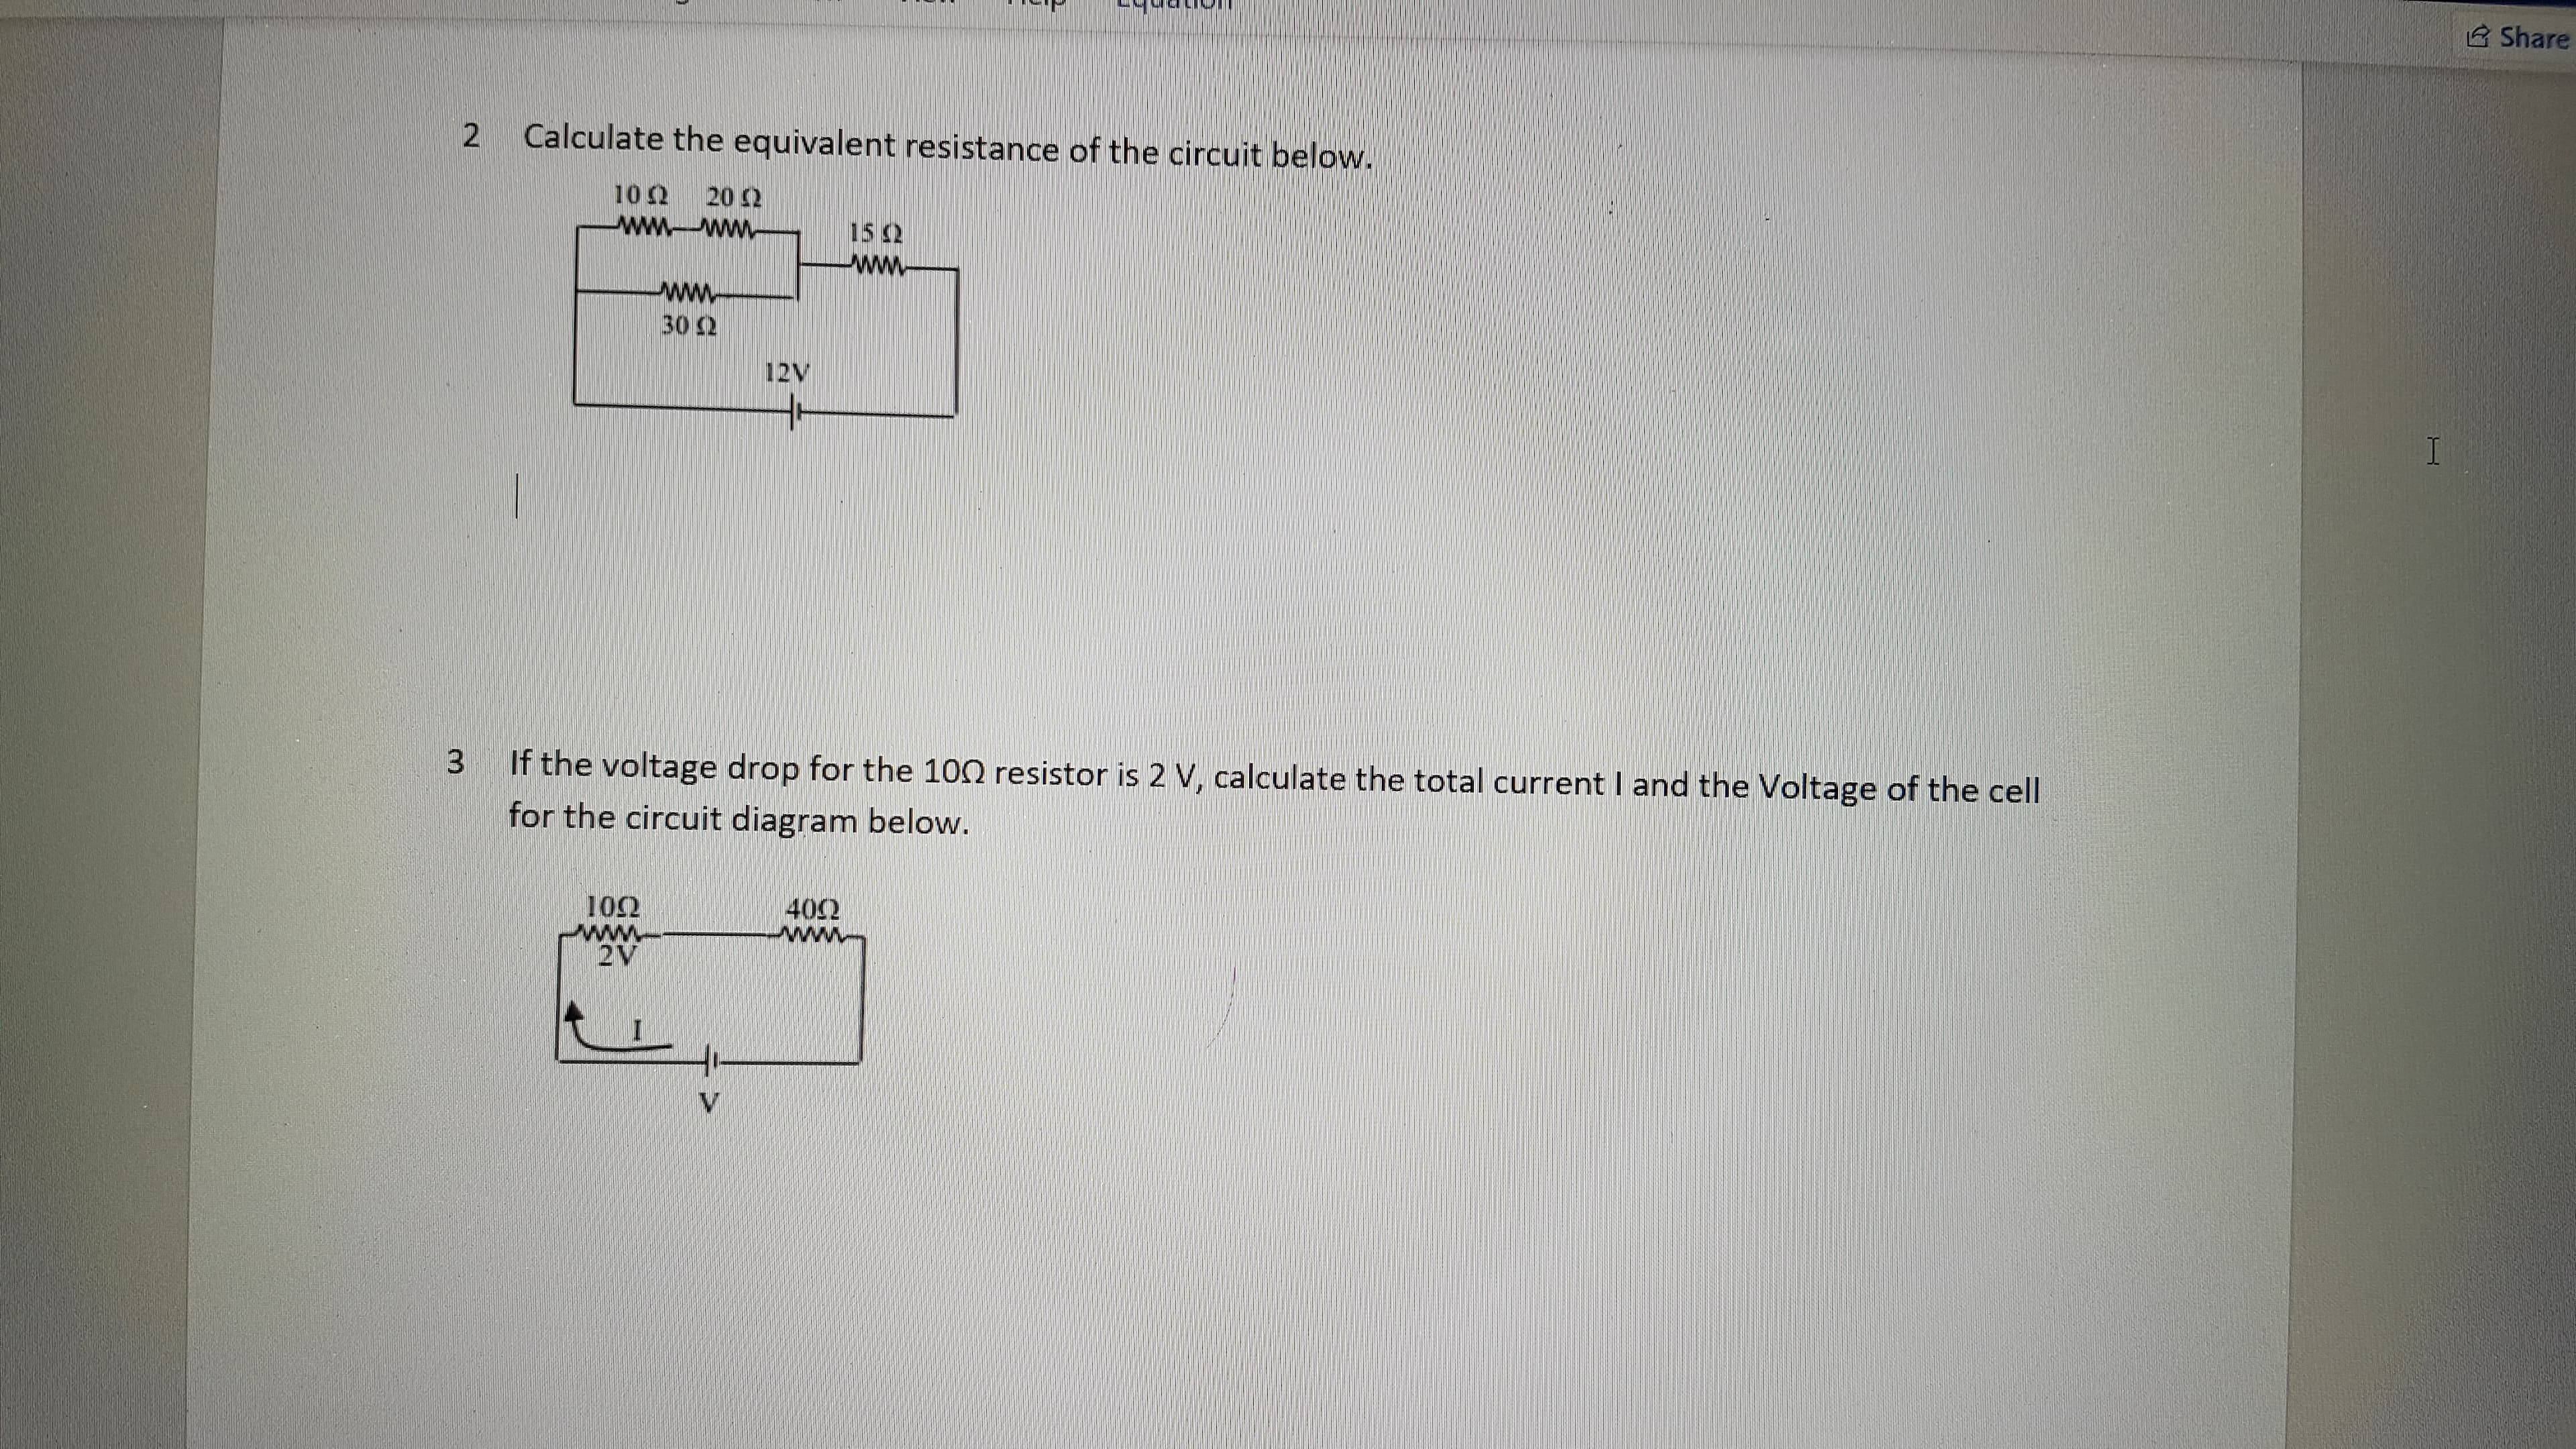 B Share
Calculate the equivalent resistance of the circuit below.
20 2
10 2
ww
ww
15 2
30 2
12V
I
If the voltage drop for the 100 resistor is 2 V, calculate the total current I and the Voltage of the cell
for the circuit diagram below.
102
